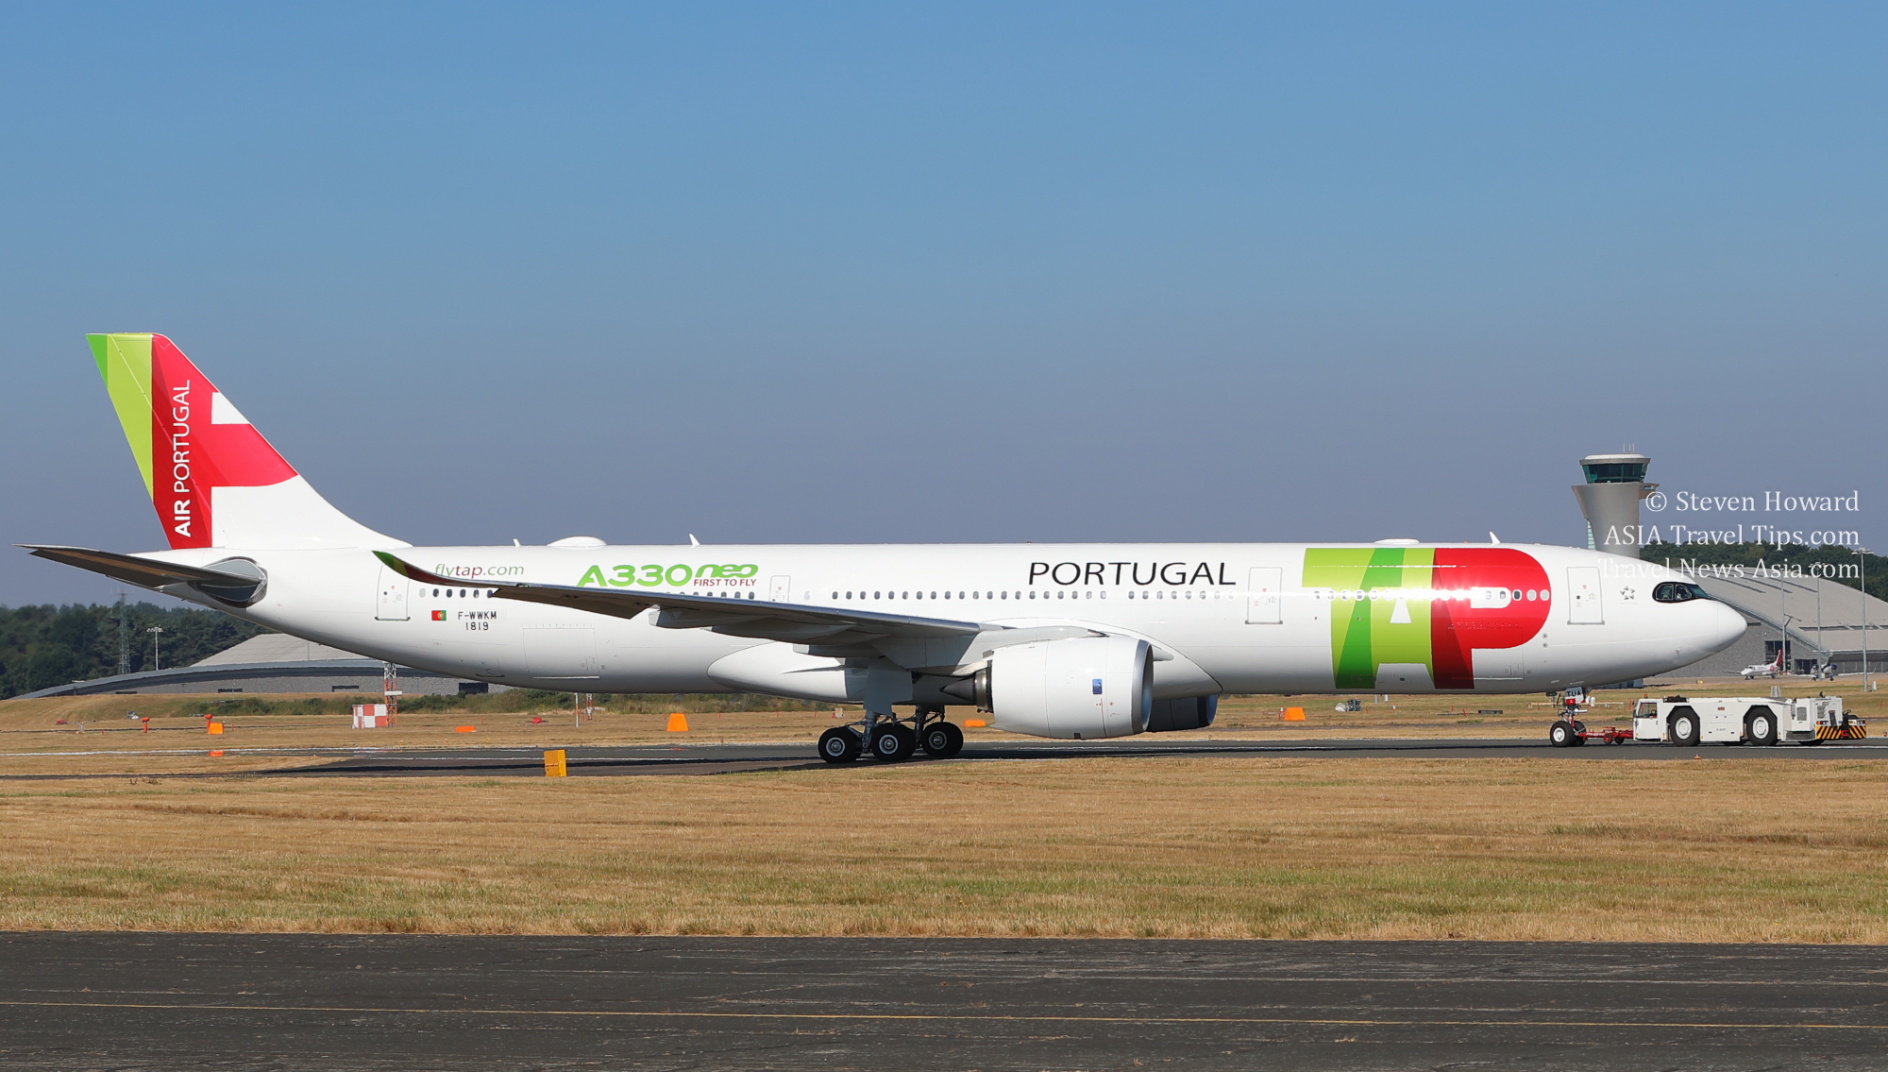 TAP Air Portugal Airbus A330neo reg: F-WWKM. Picture by Steven Howard of TravelNewsAsia.com Click to enlarge.